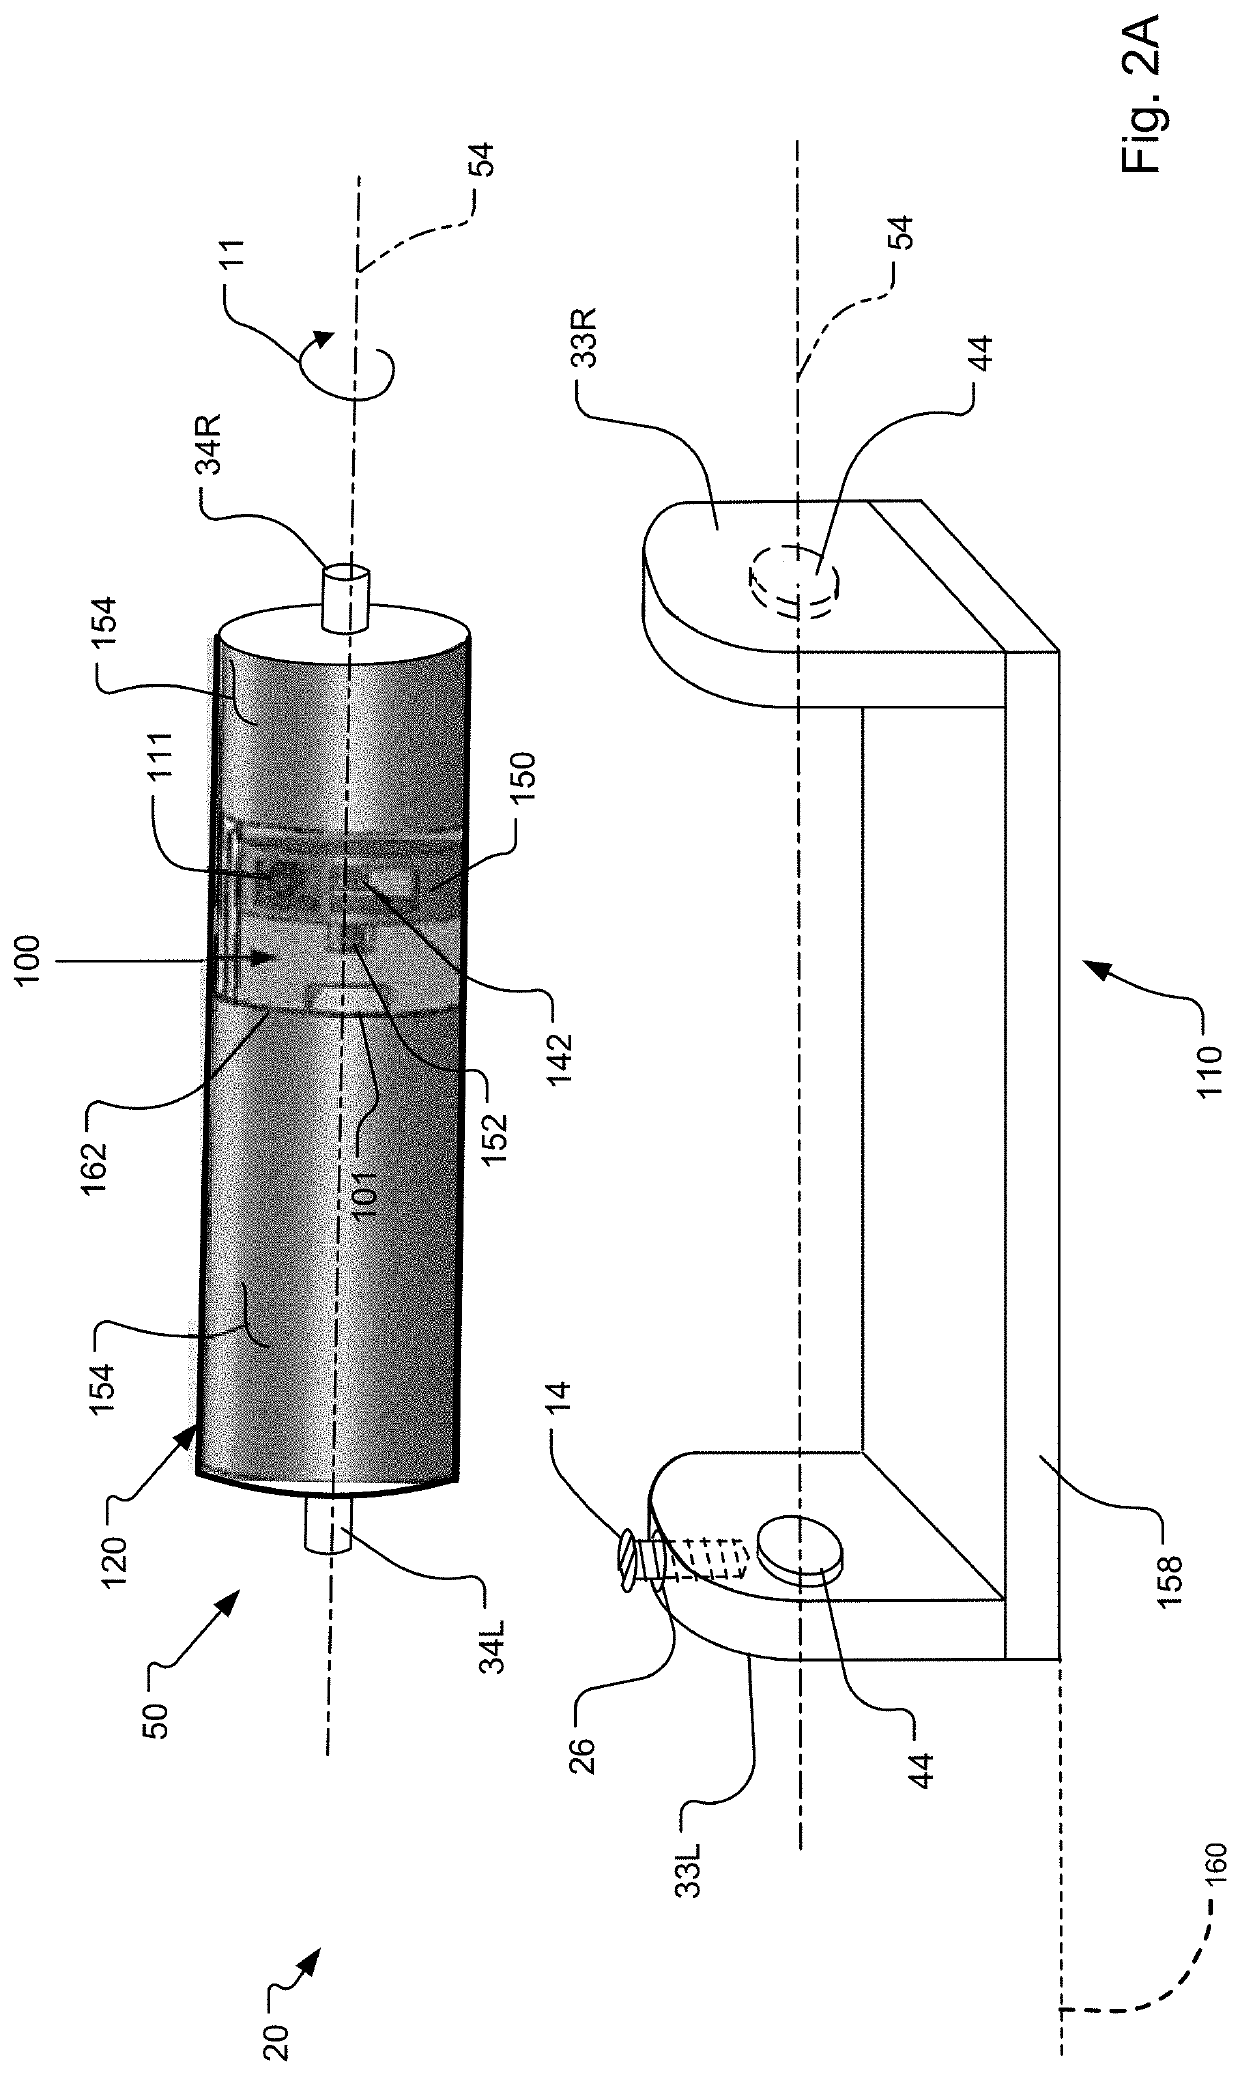 Optical displacement detector with adjustable pattern direction